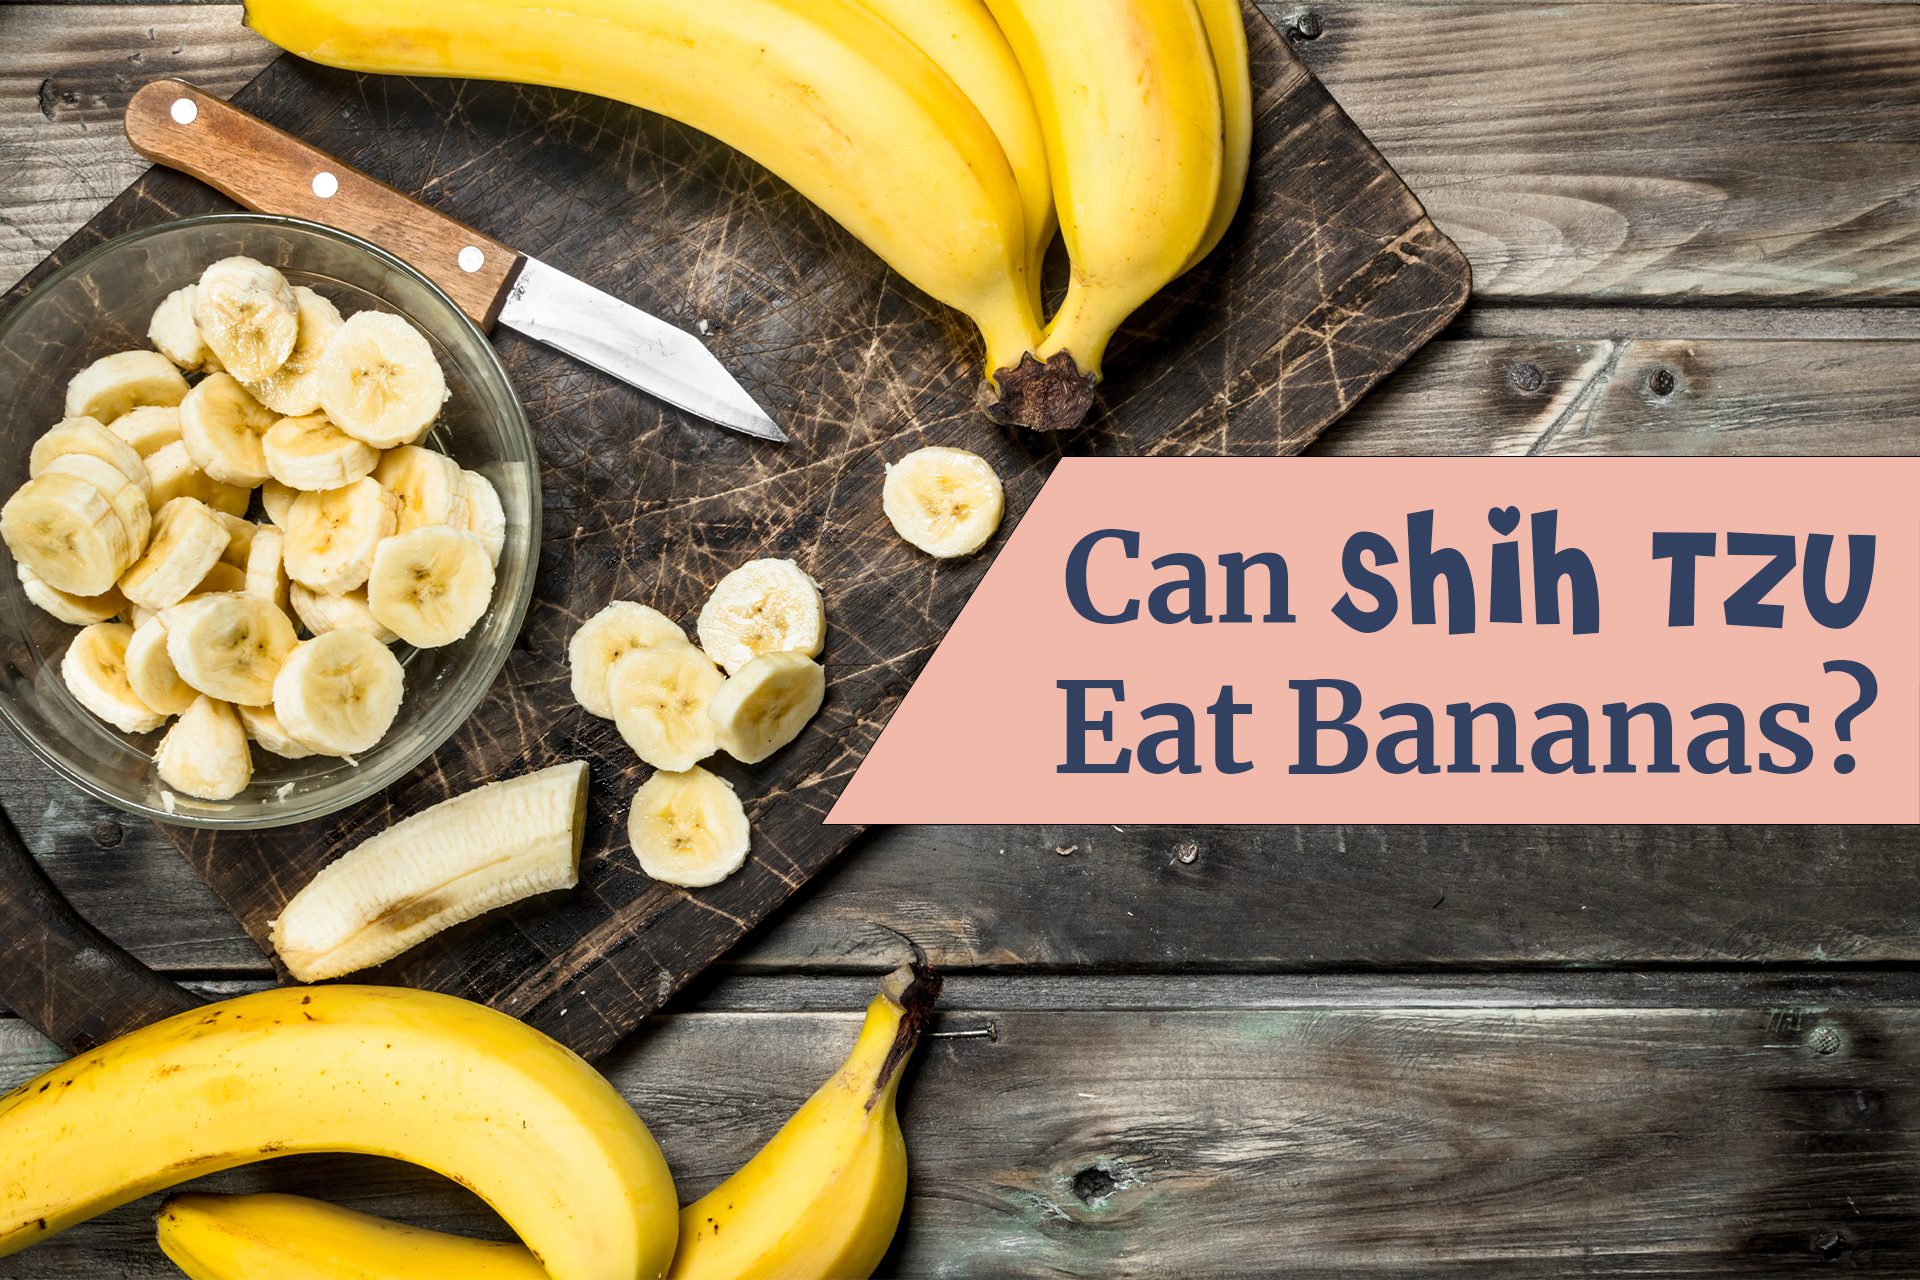 Can Shih Tzu eat bananas? Yes, Shih Tzu can eat bananas but there are some important things to consider first